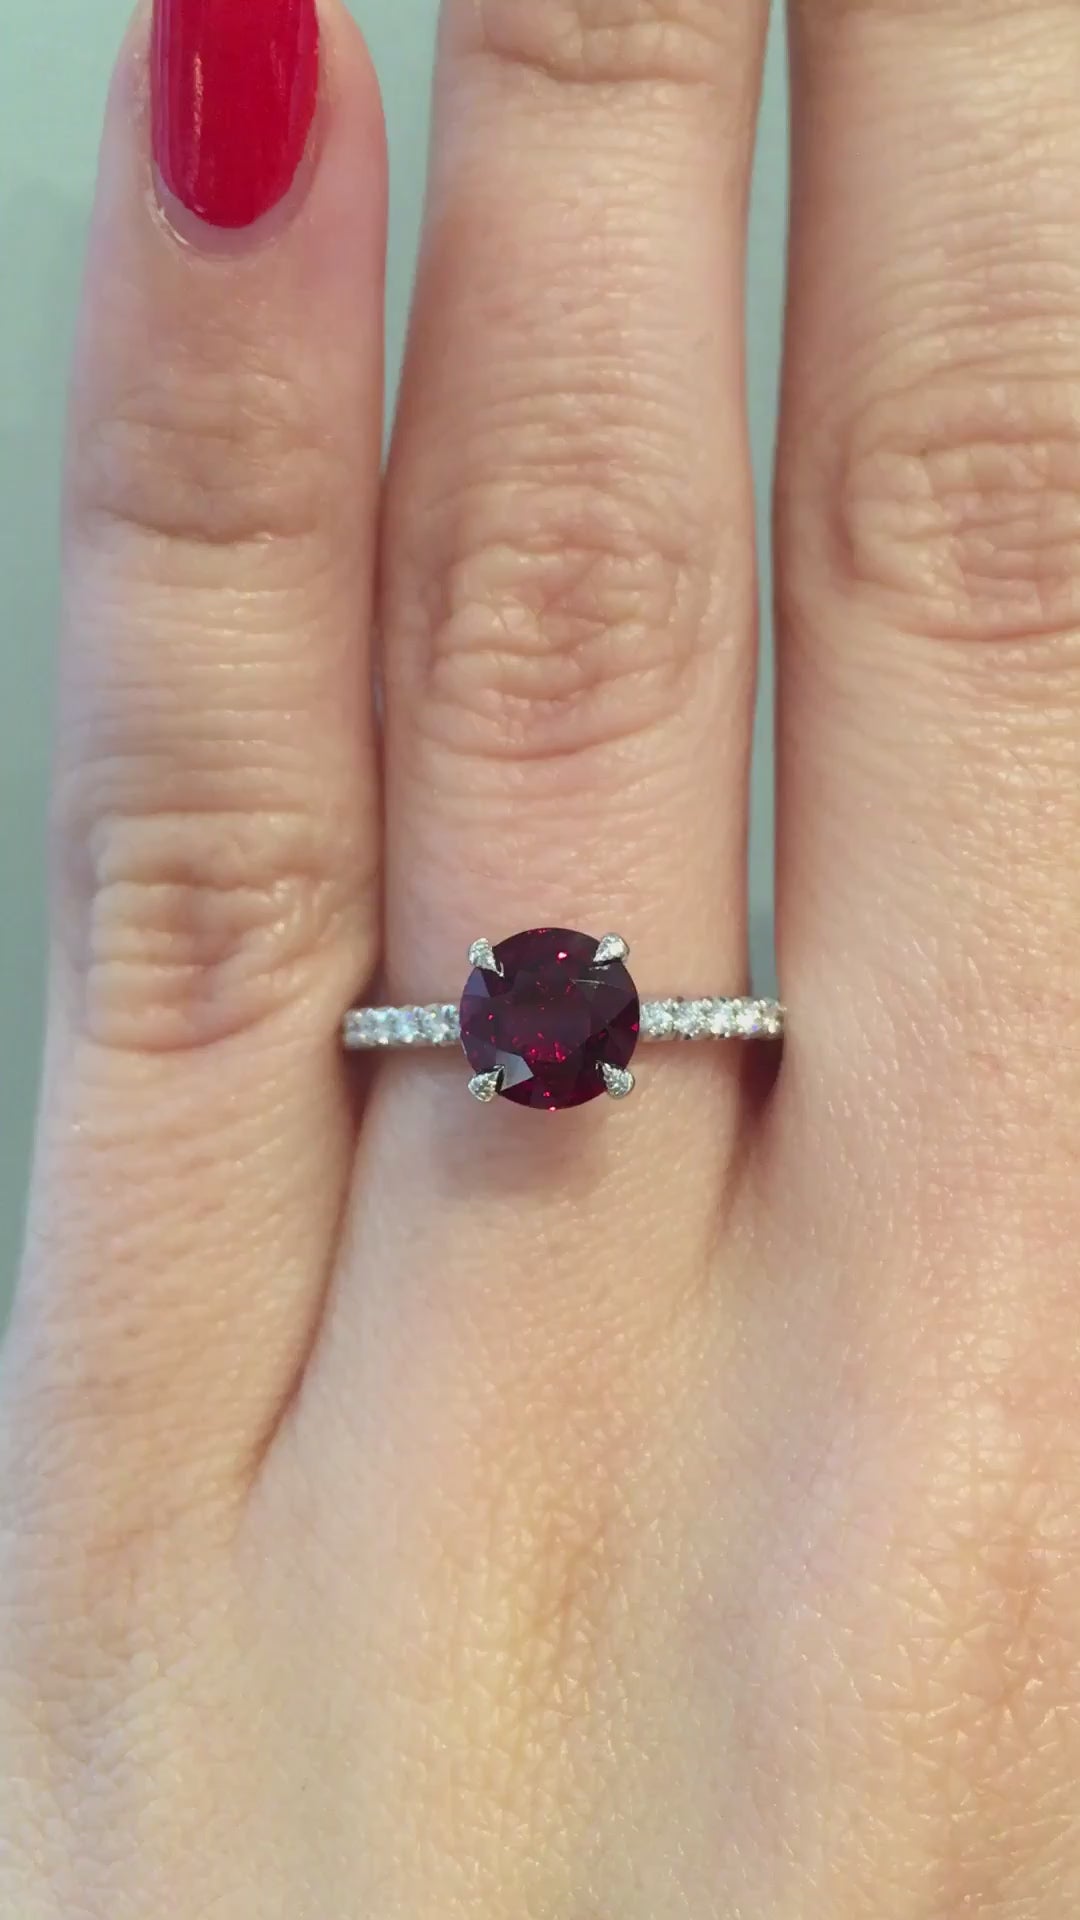 caption:Shown with 1ct ruby, round cut diamond